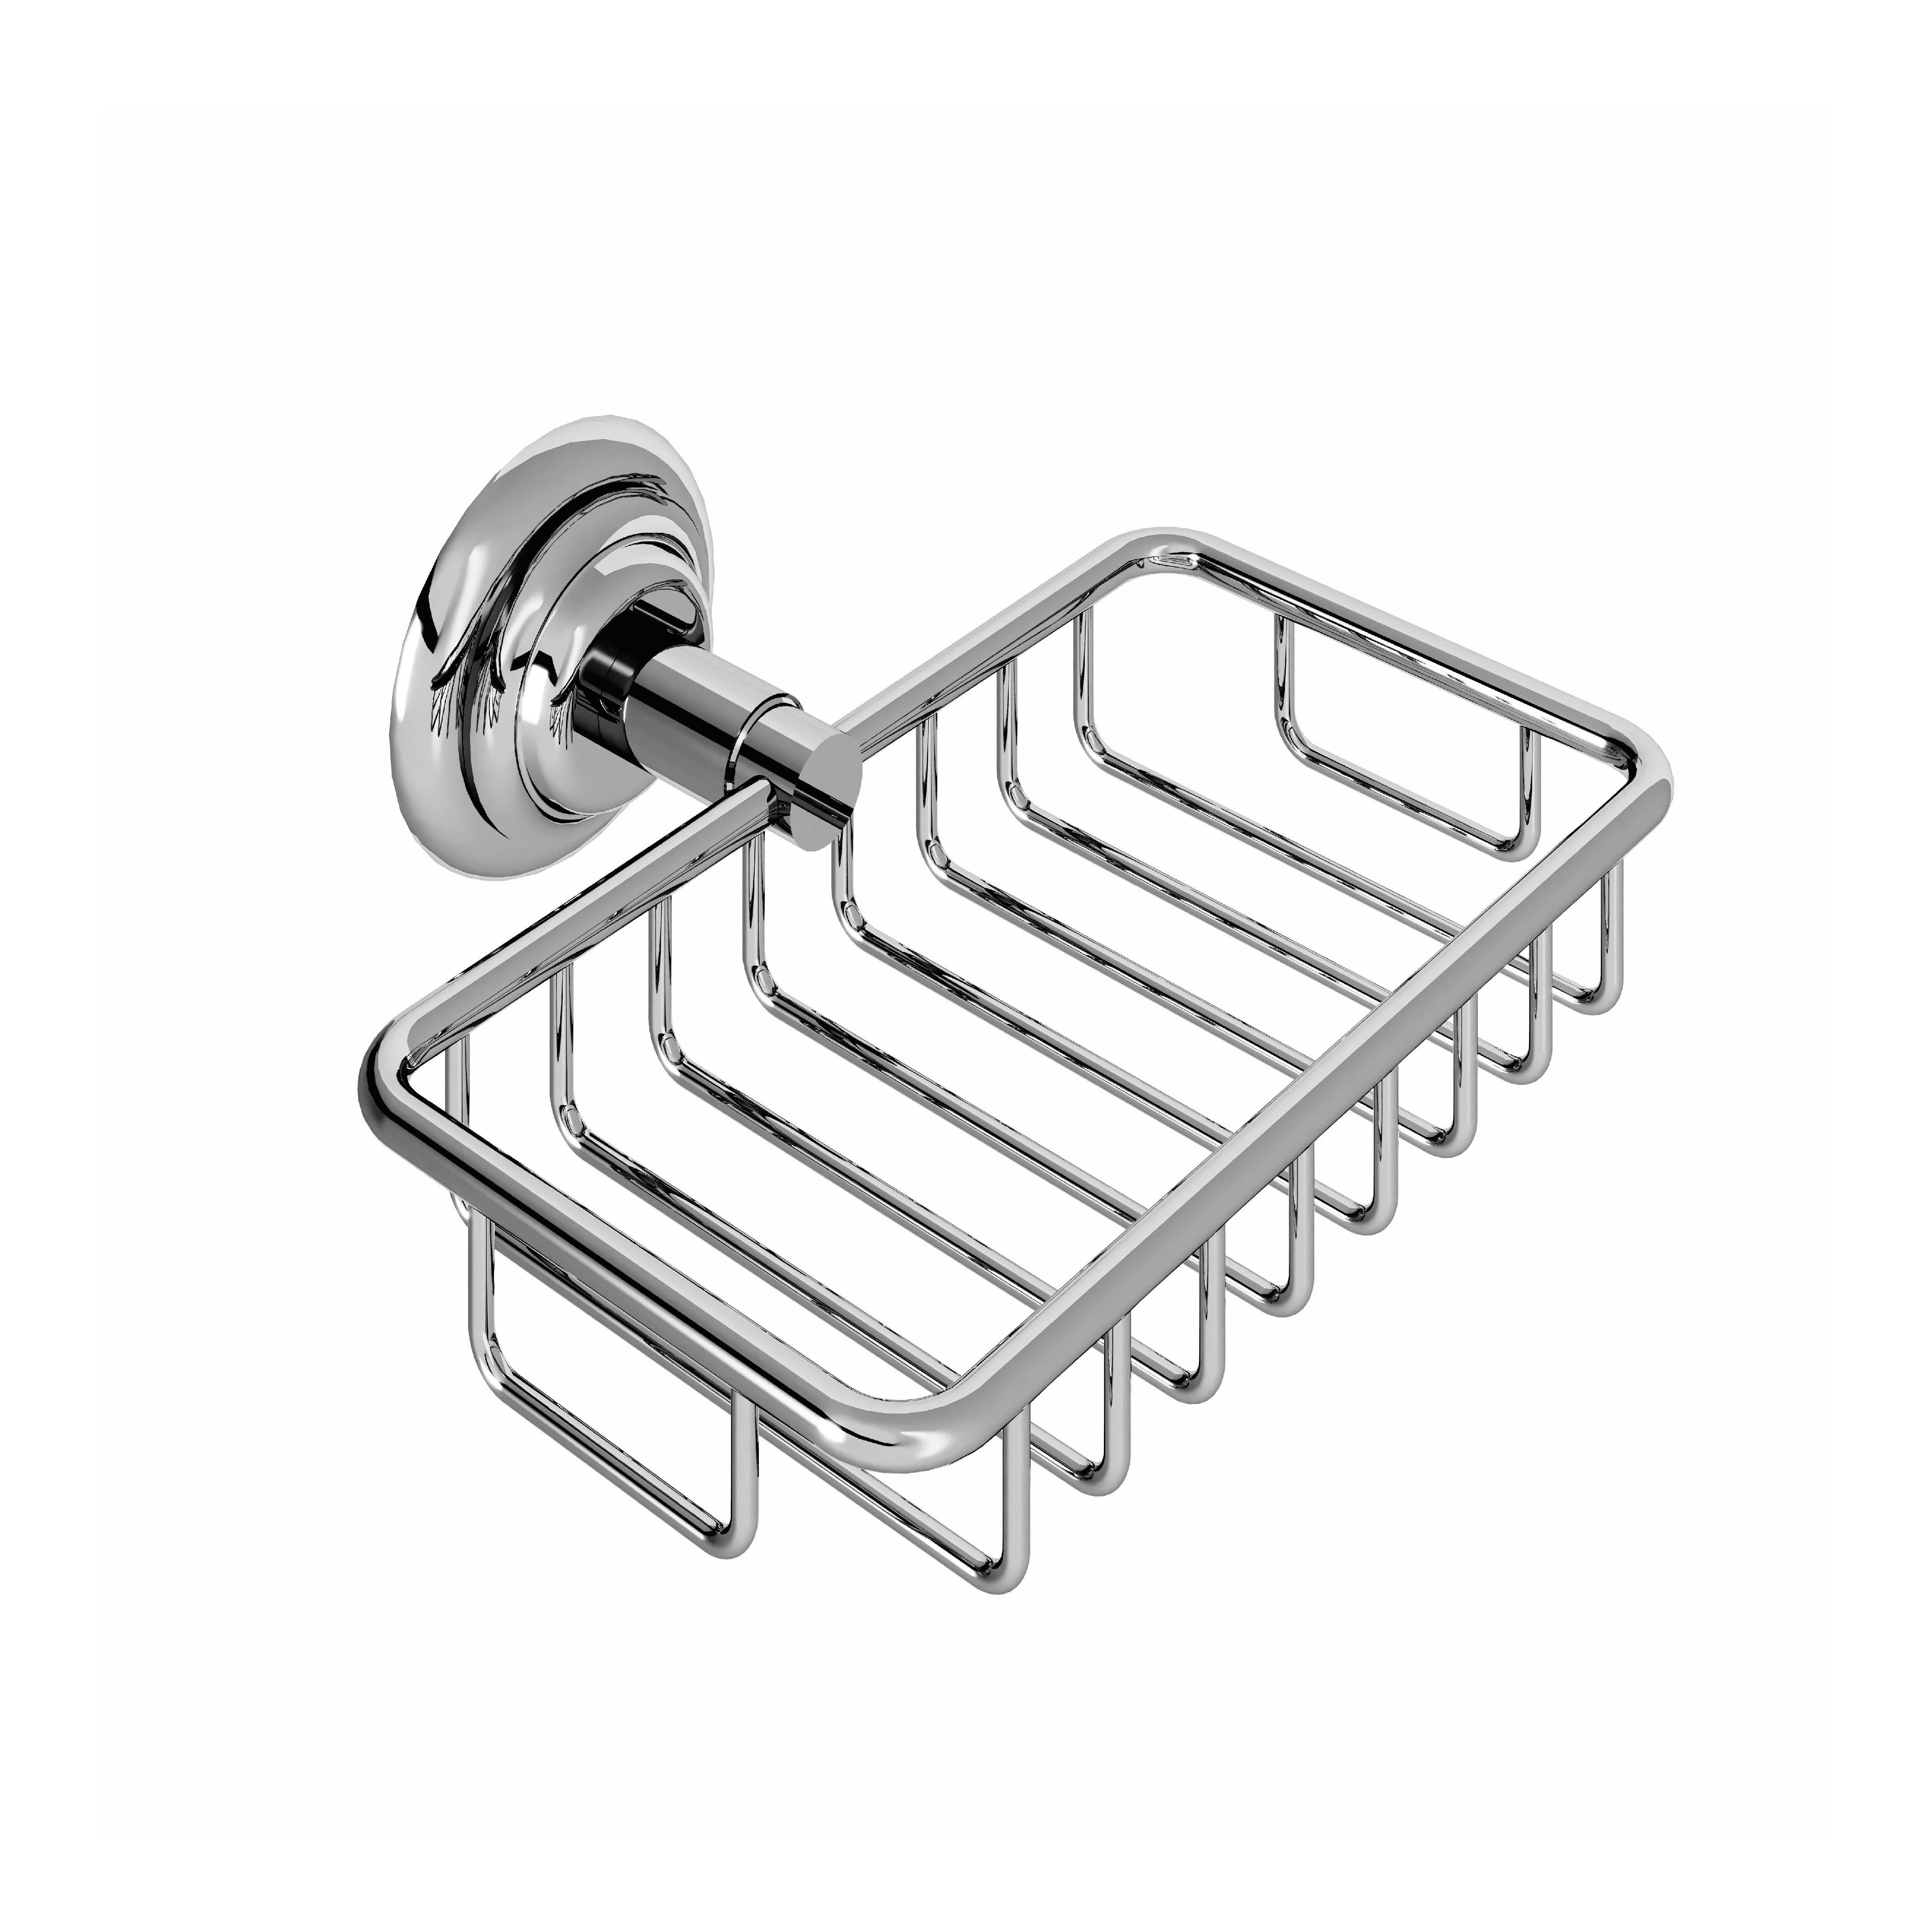 M04-519 Wall mounted shower soap holder